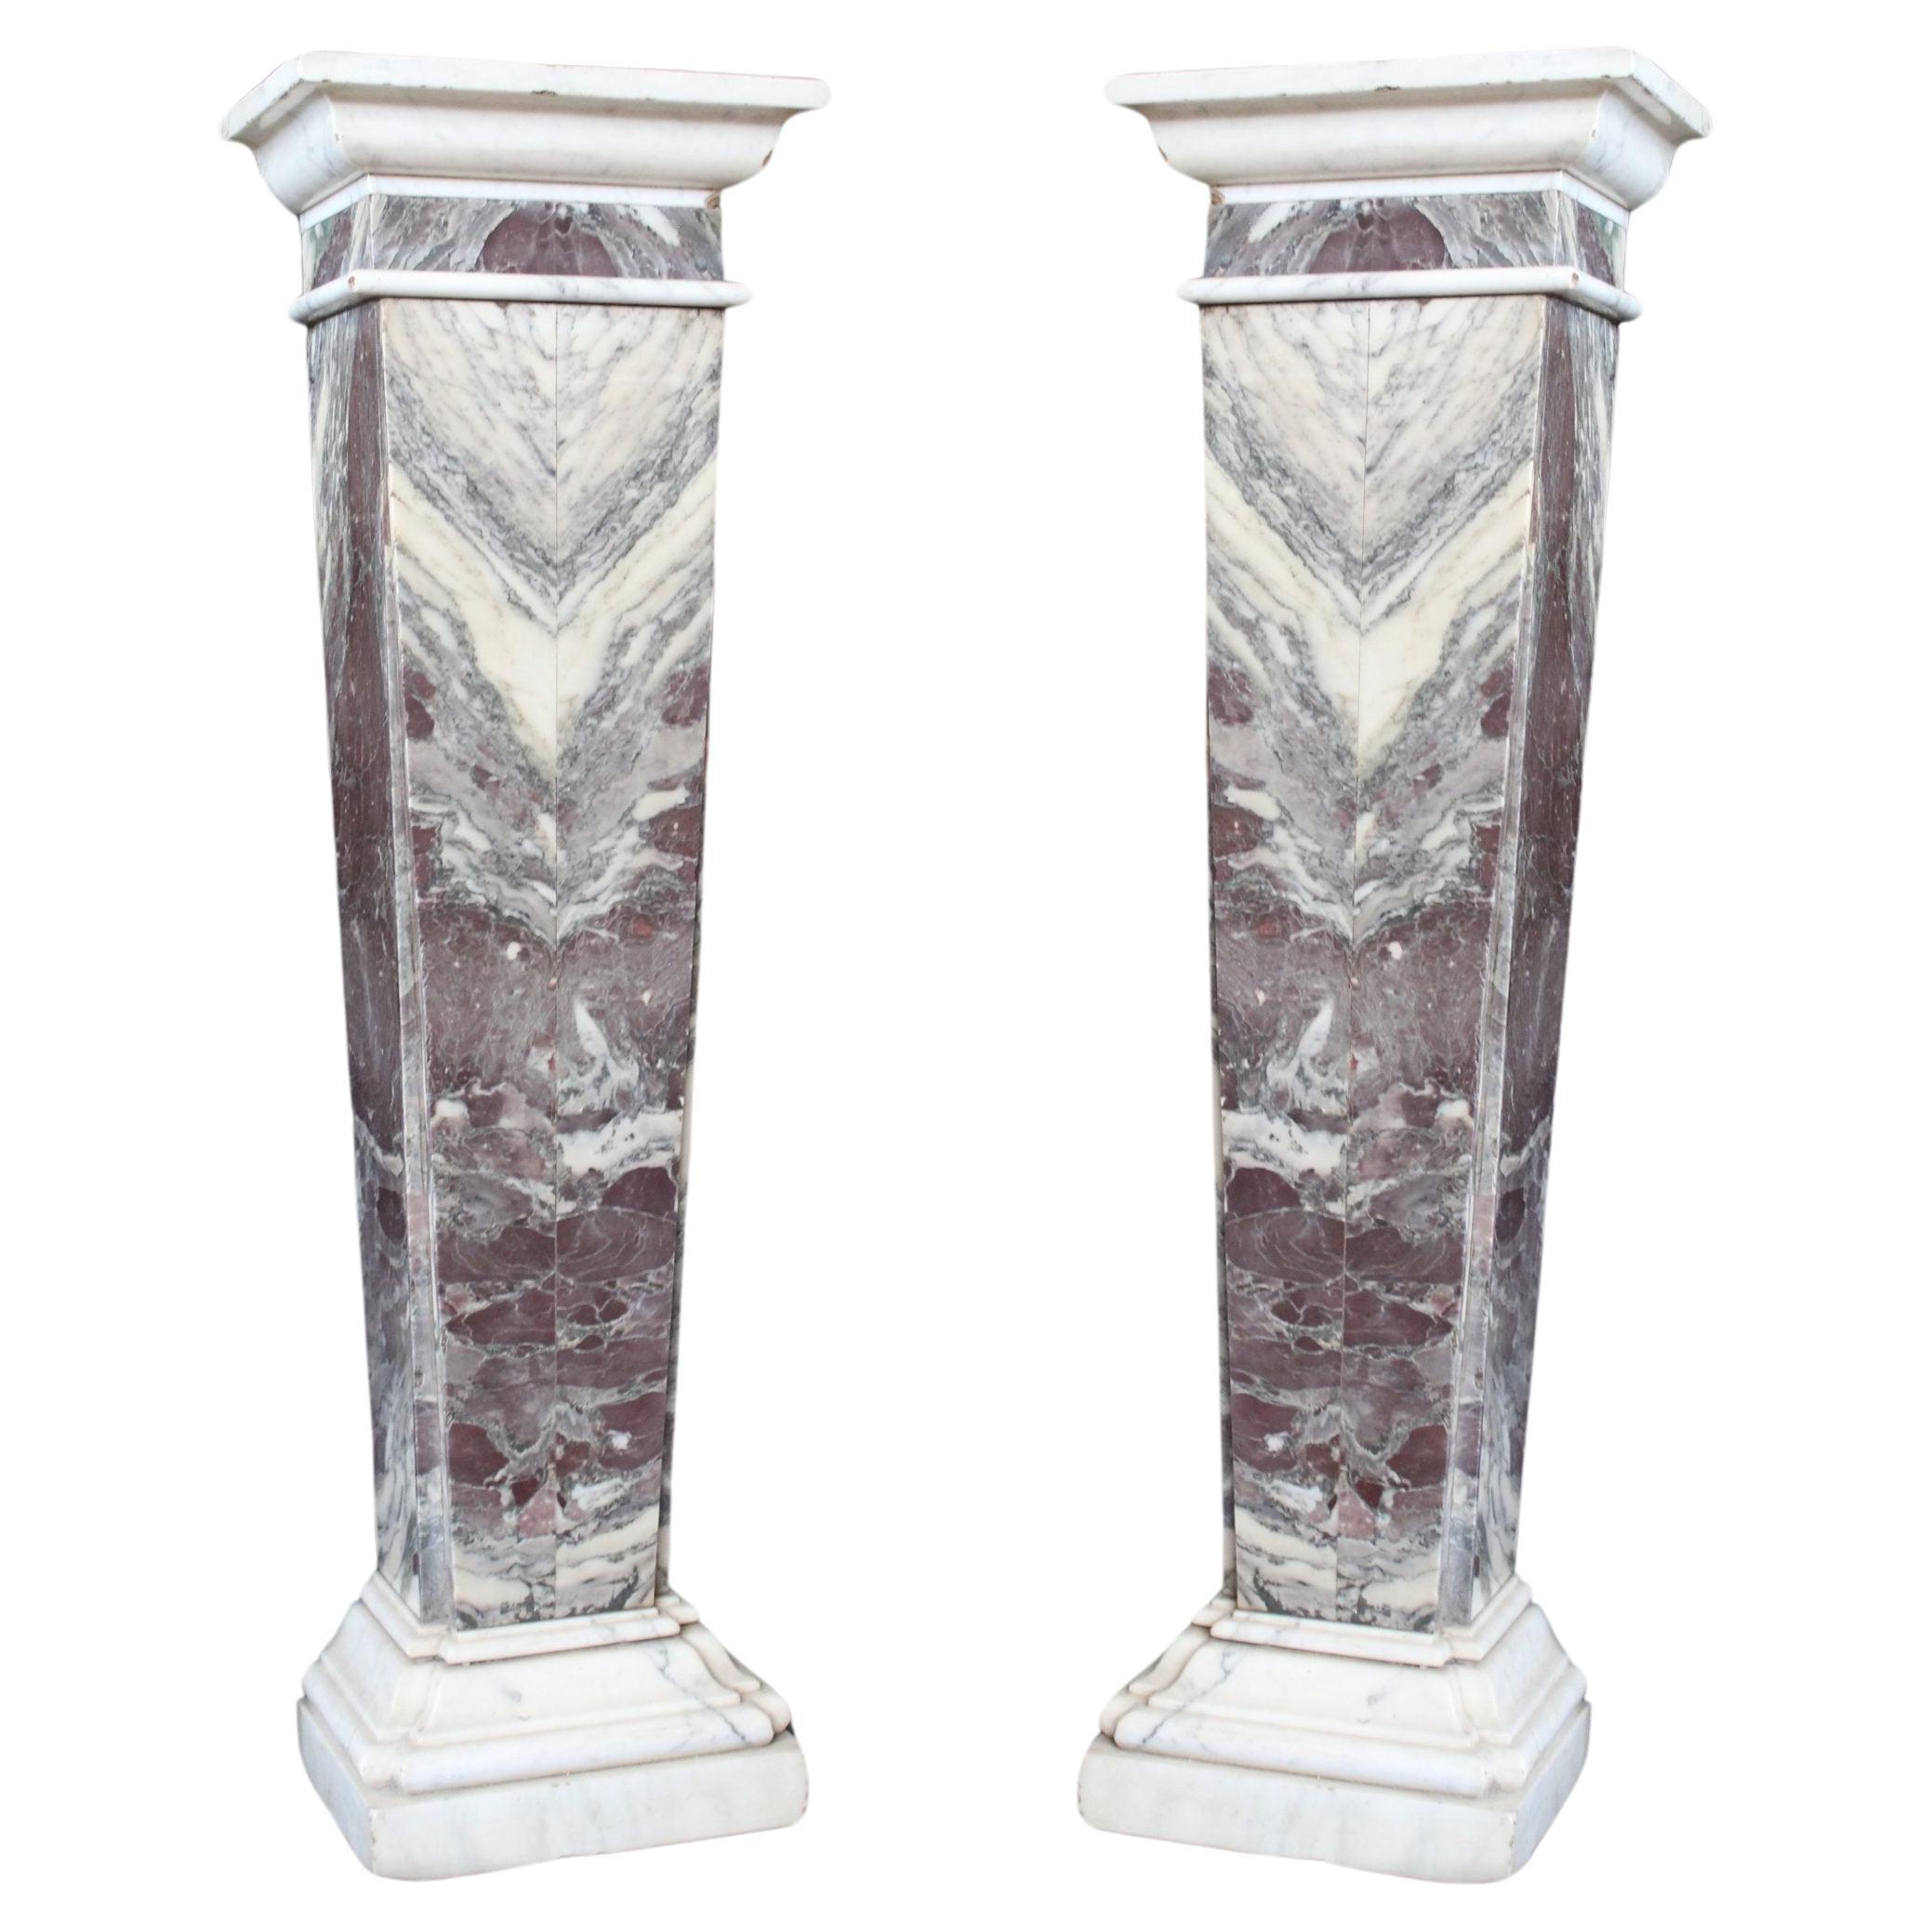 Pair of Herms in fine peach blossom marble